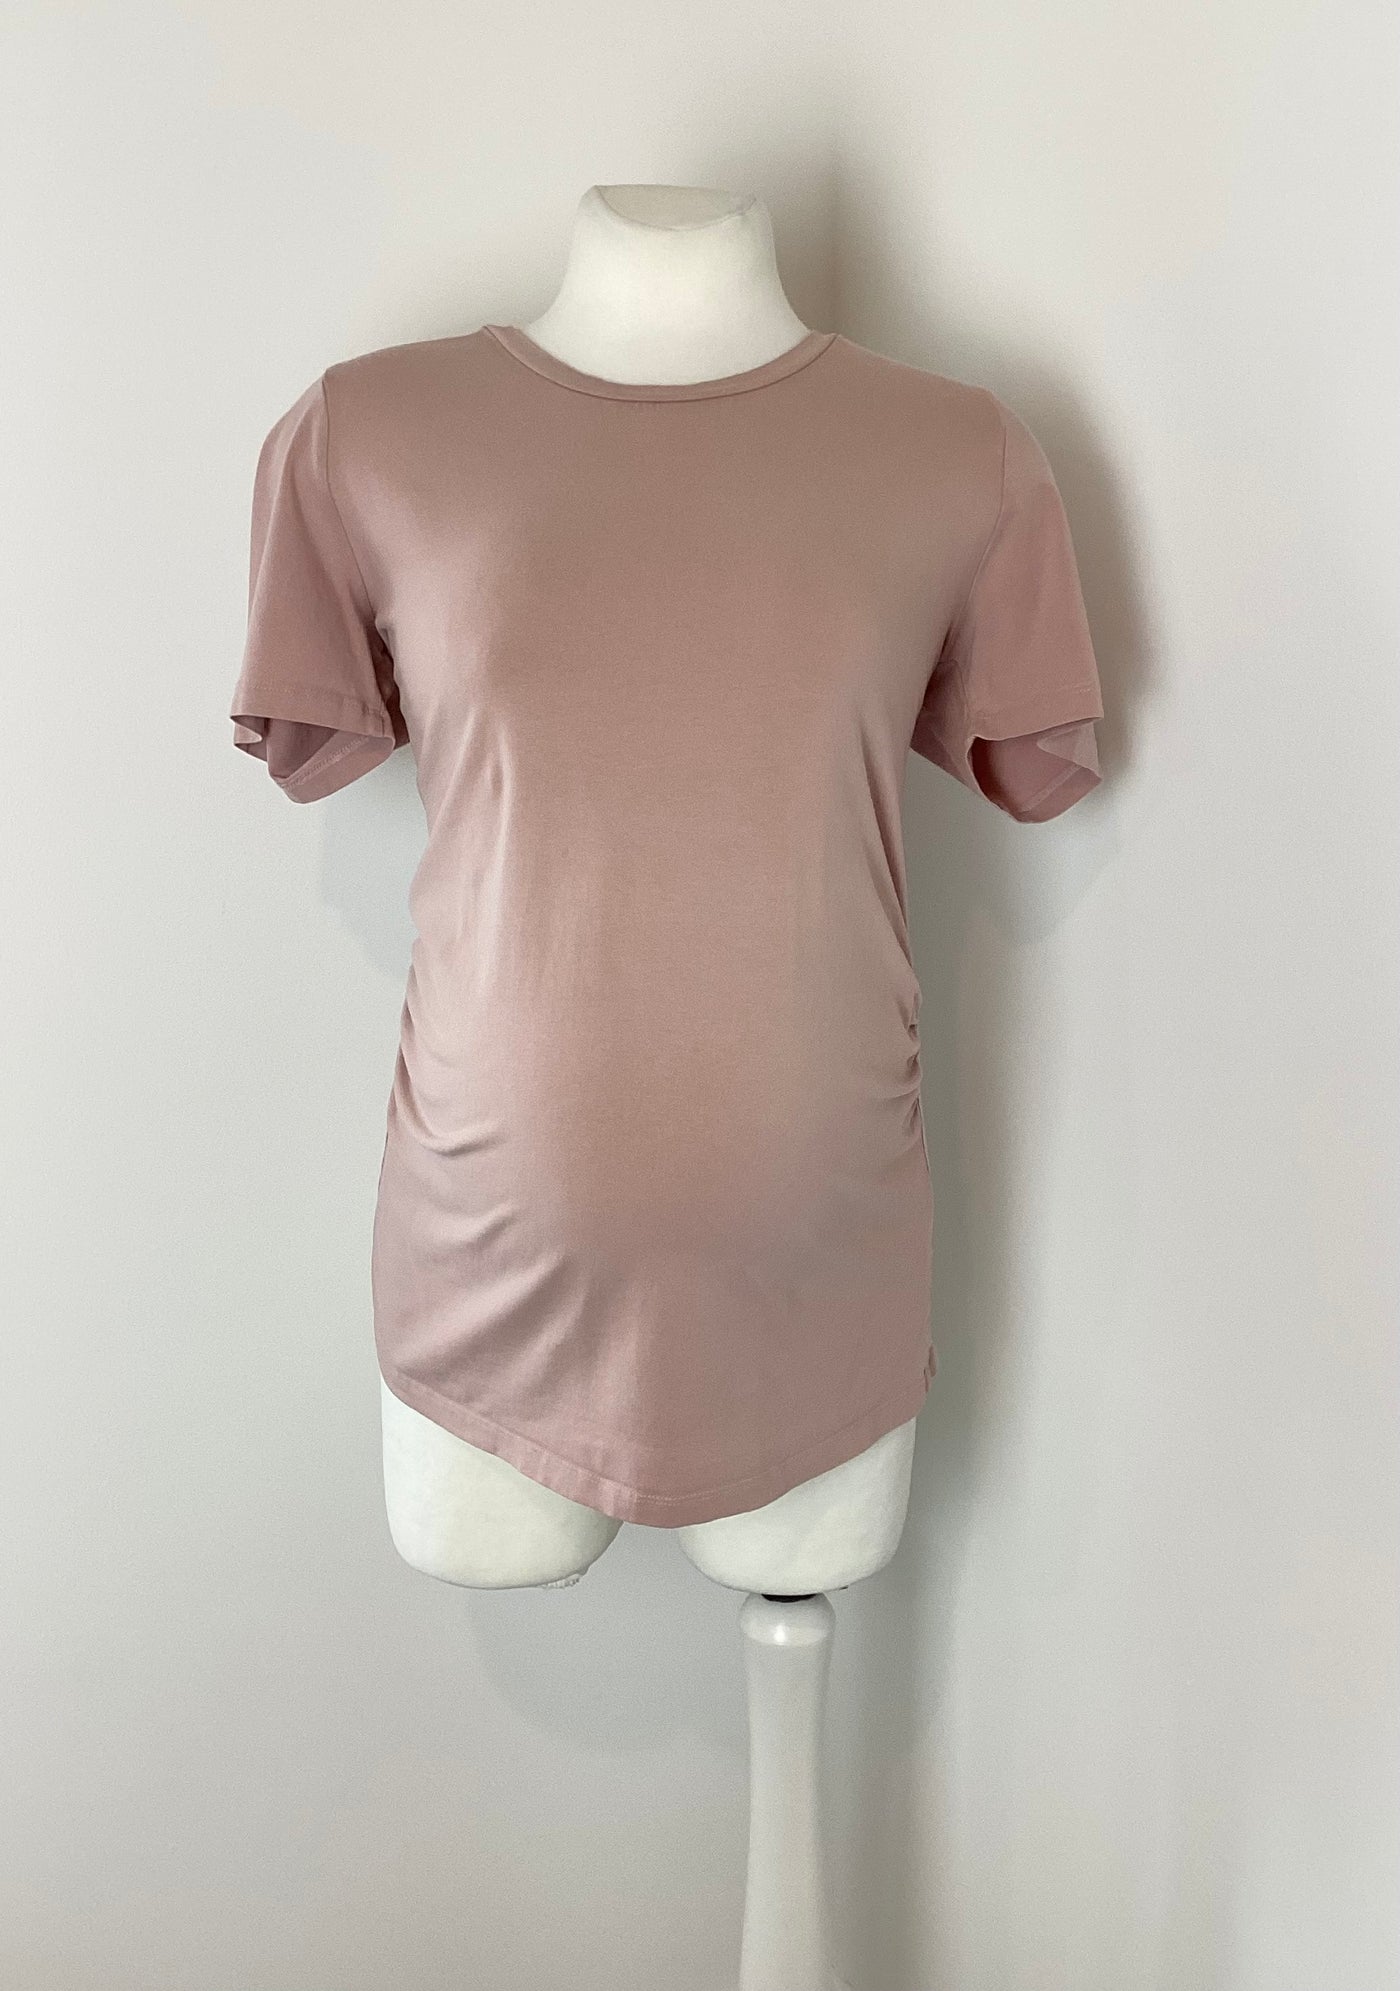 George Maternity dusky pink t-shirt top - Size 18 (more like 16/18)